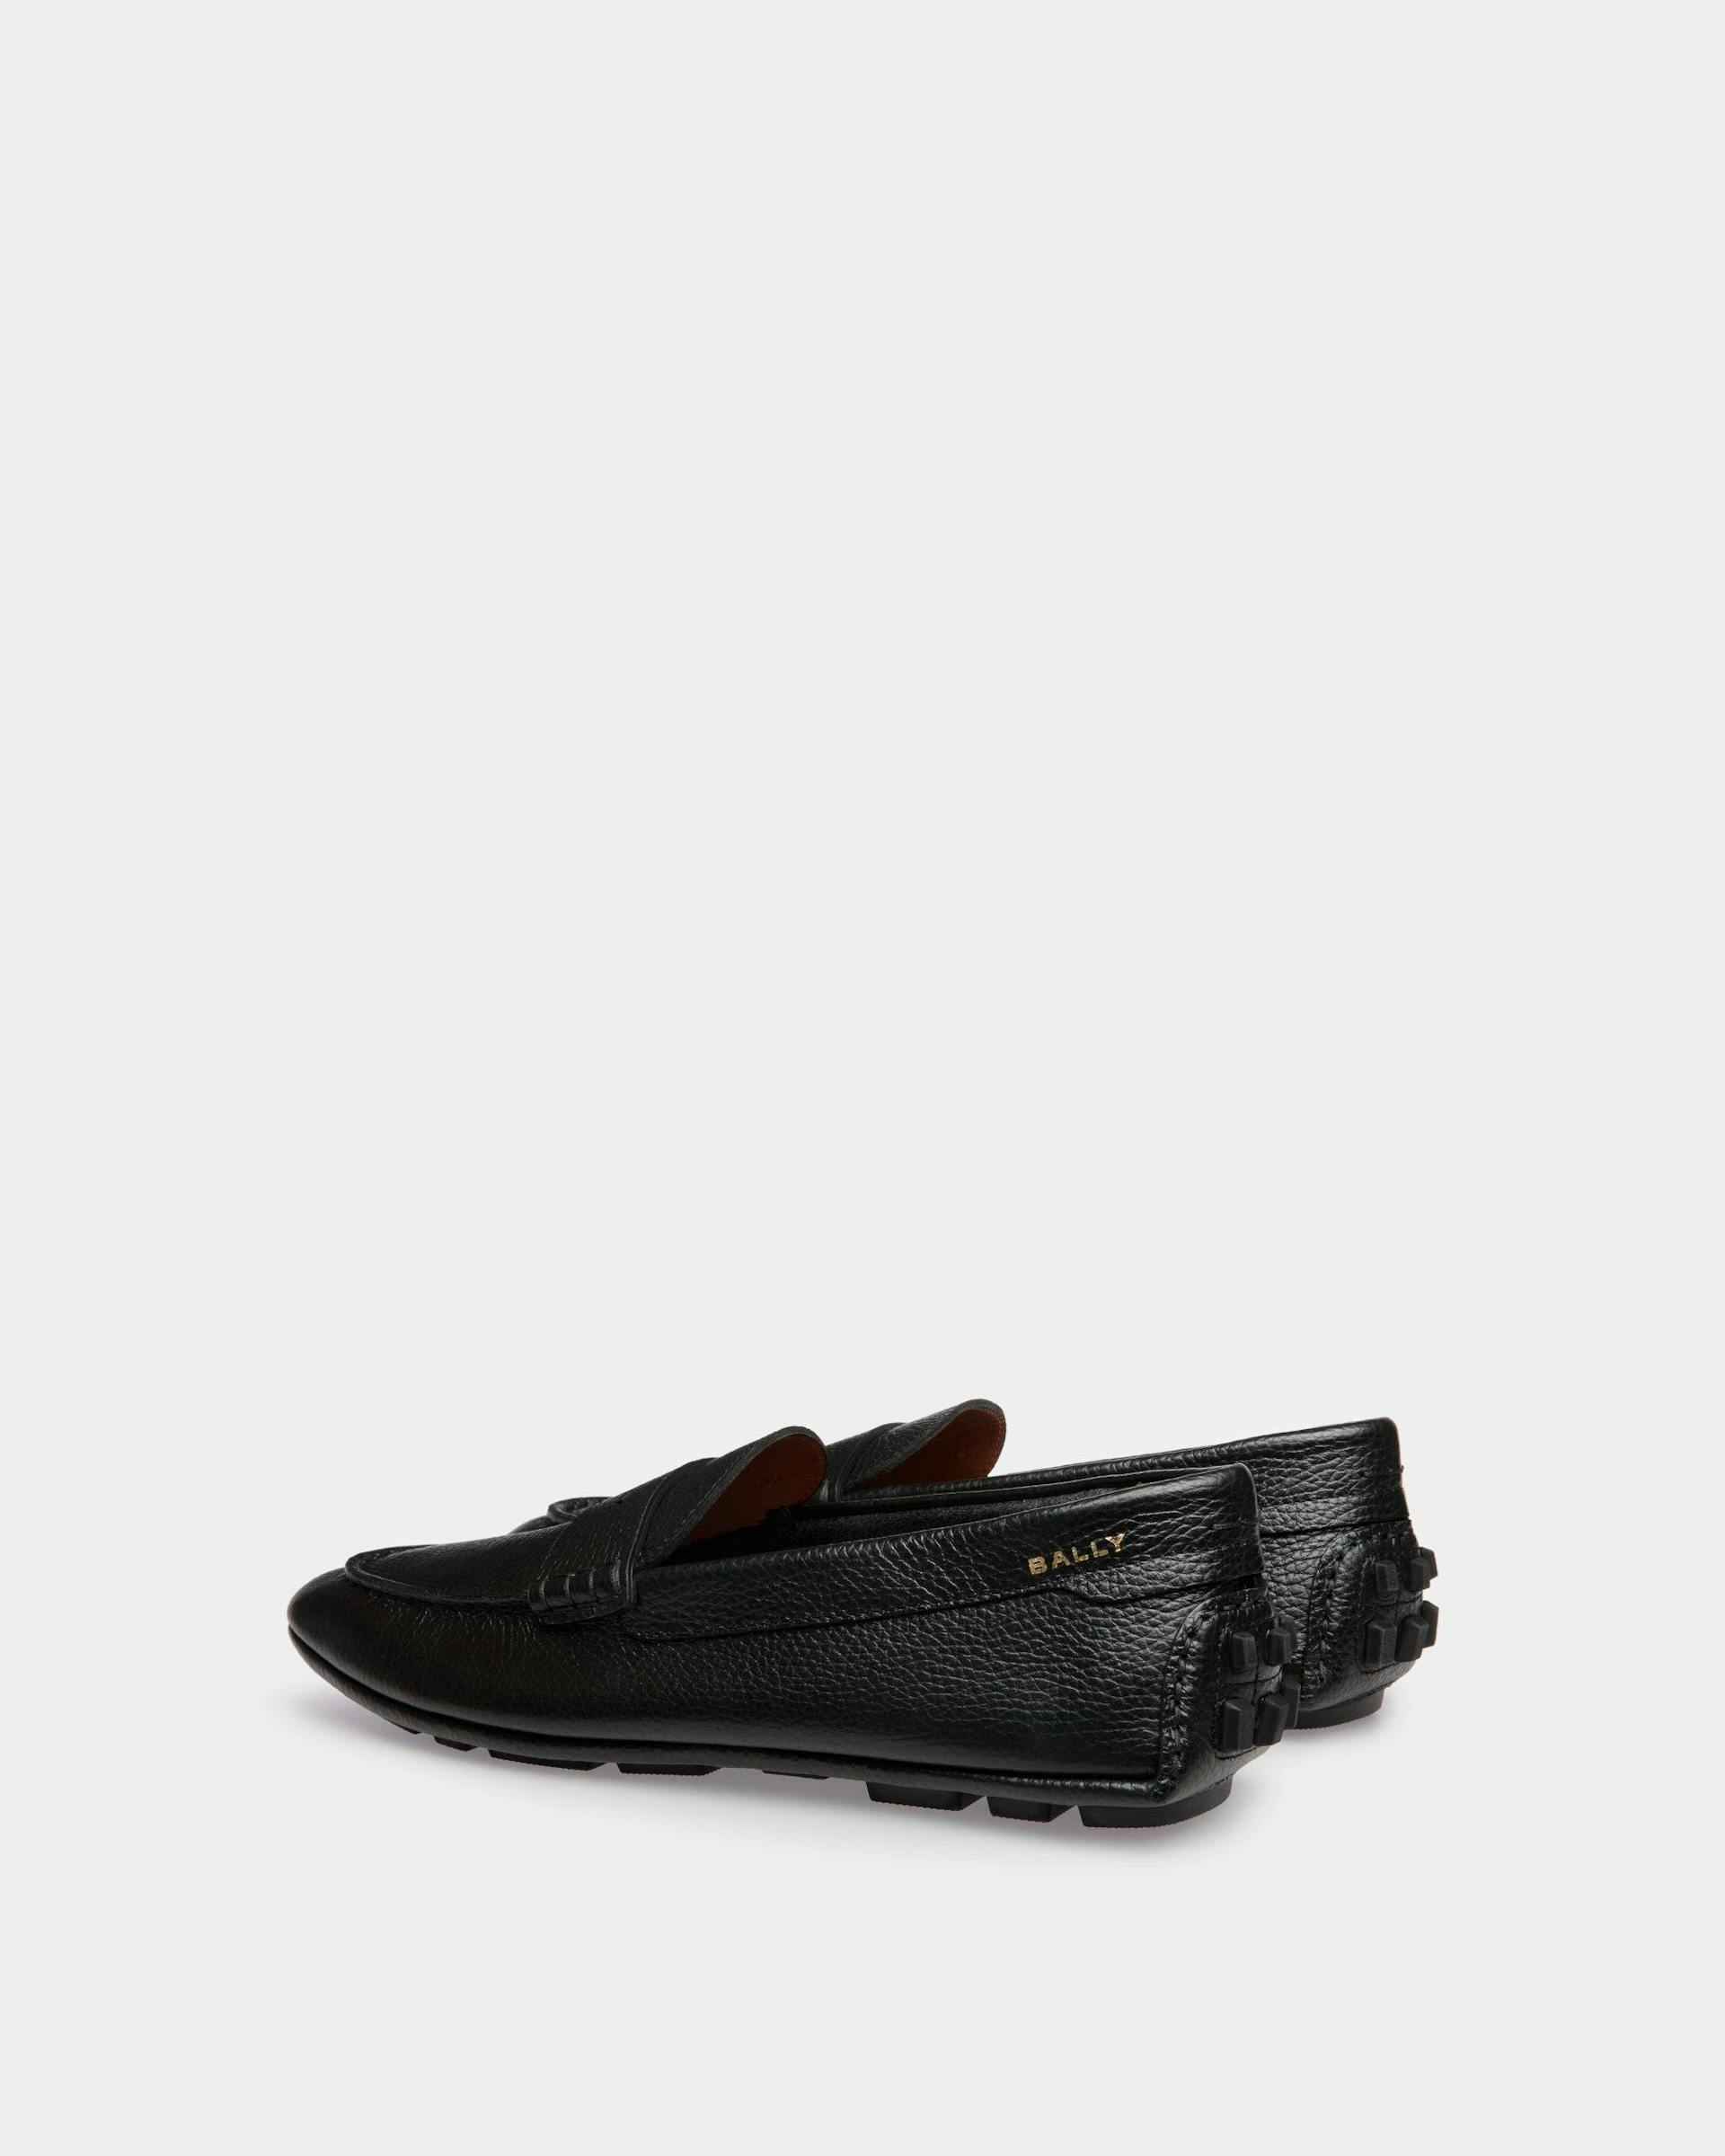 Men's Kerbs Driver in Black Grained Leather | Bally | Still Life 3/4 Back